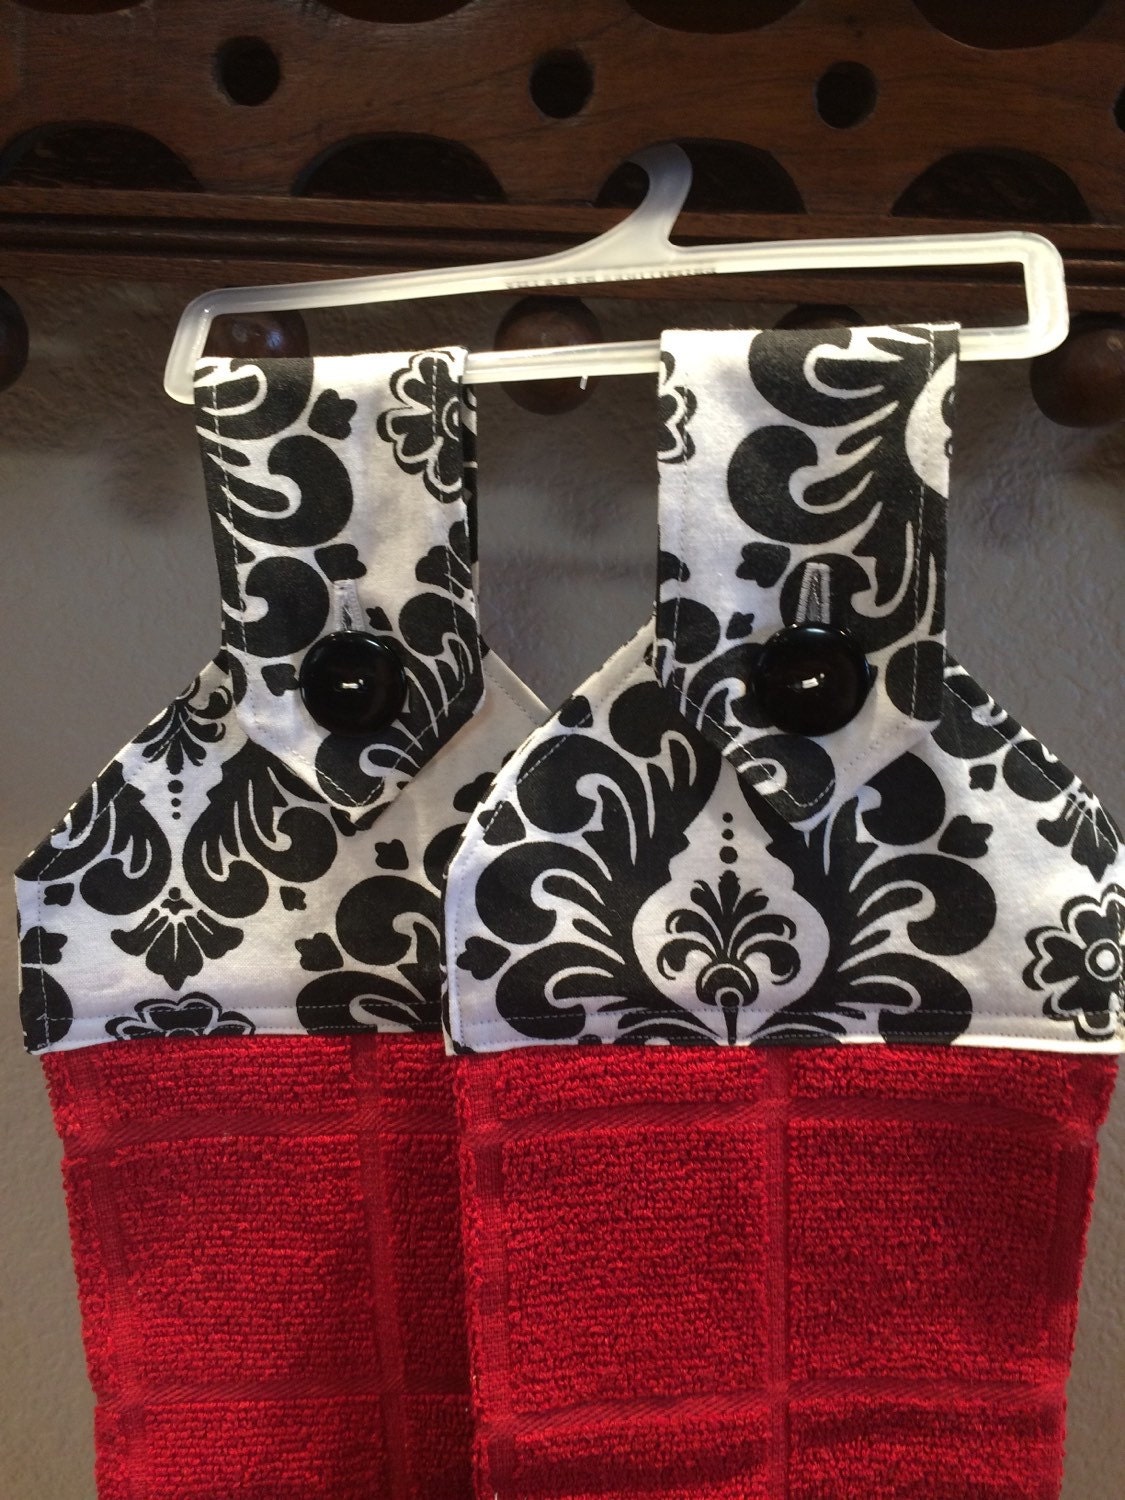  Black  Damask and Red  Towels  Kitchen or Bath 2